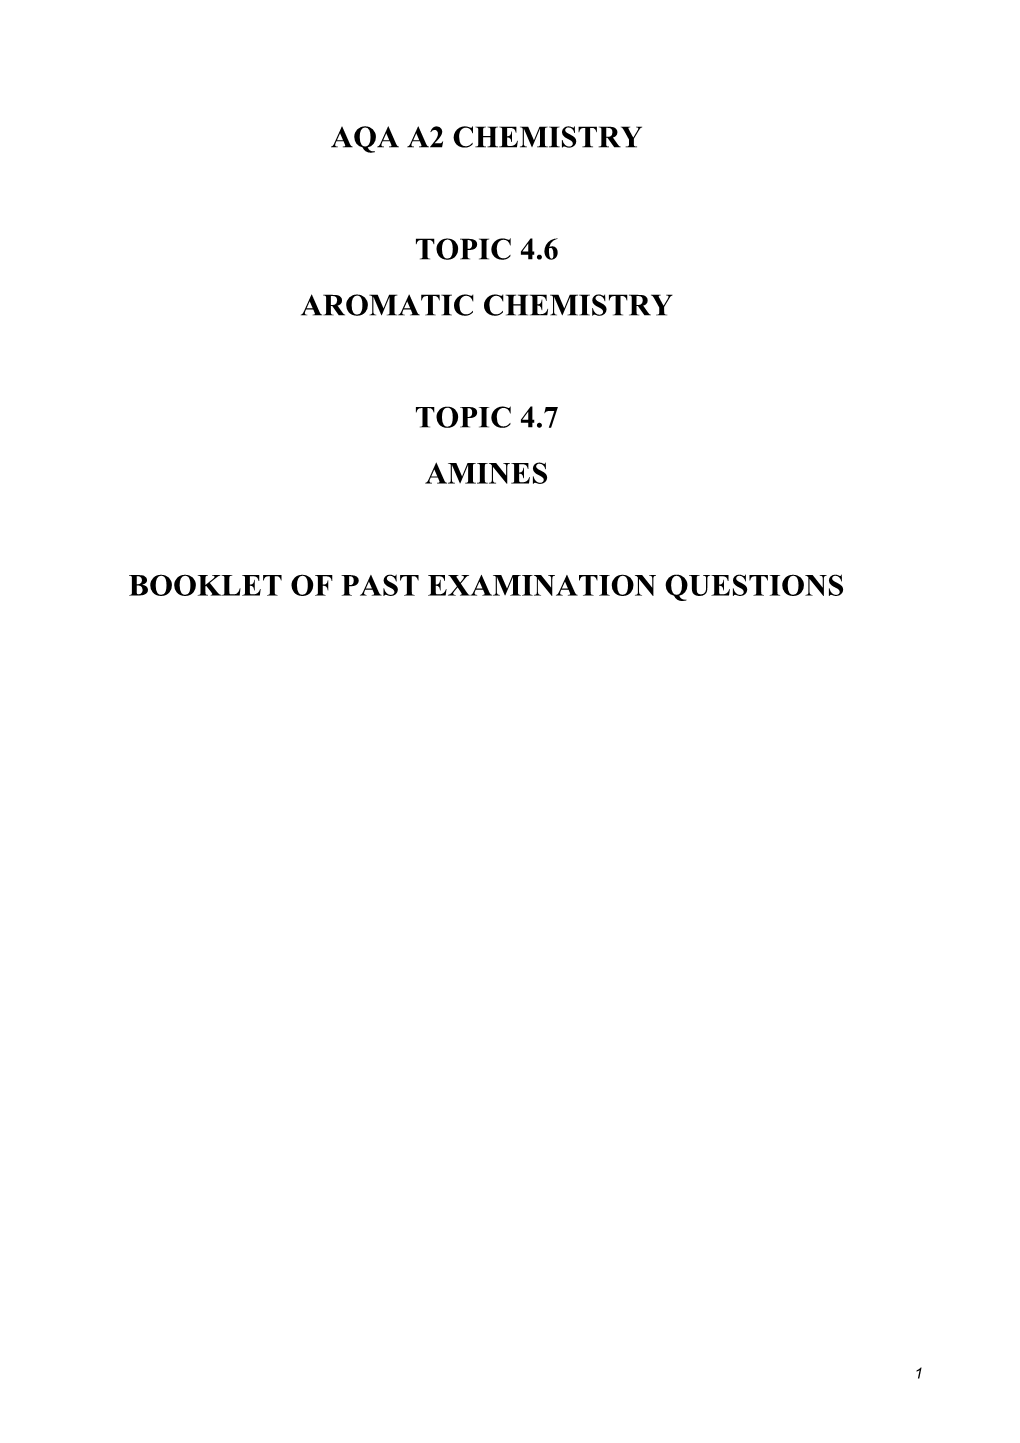 Booklet of Past Examination Questions